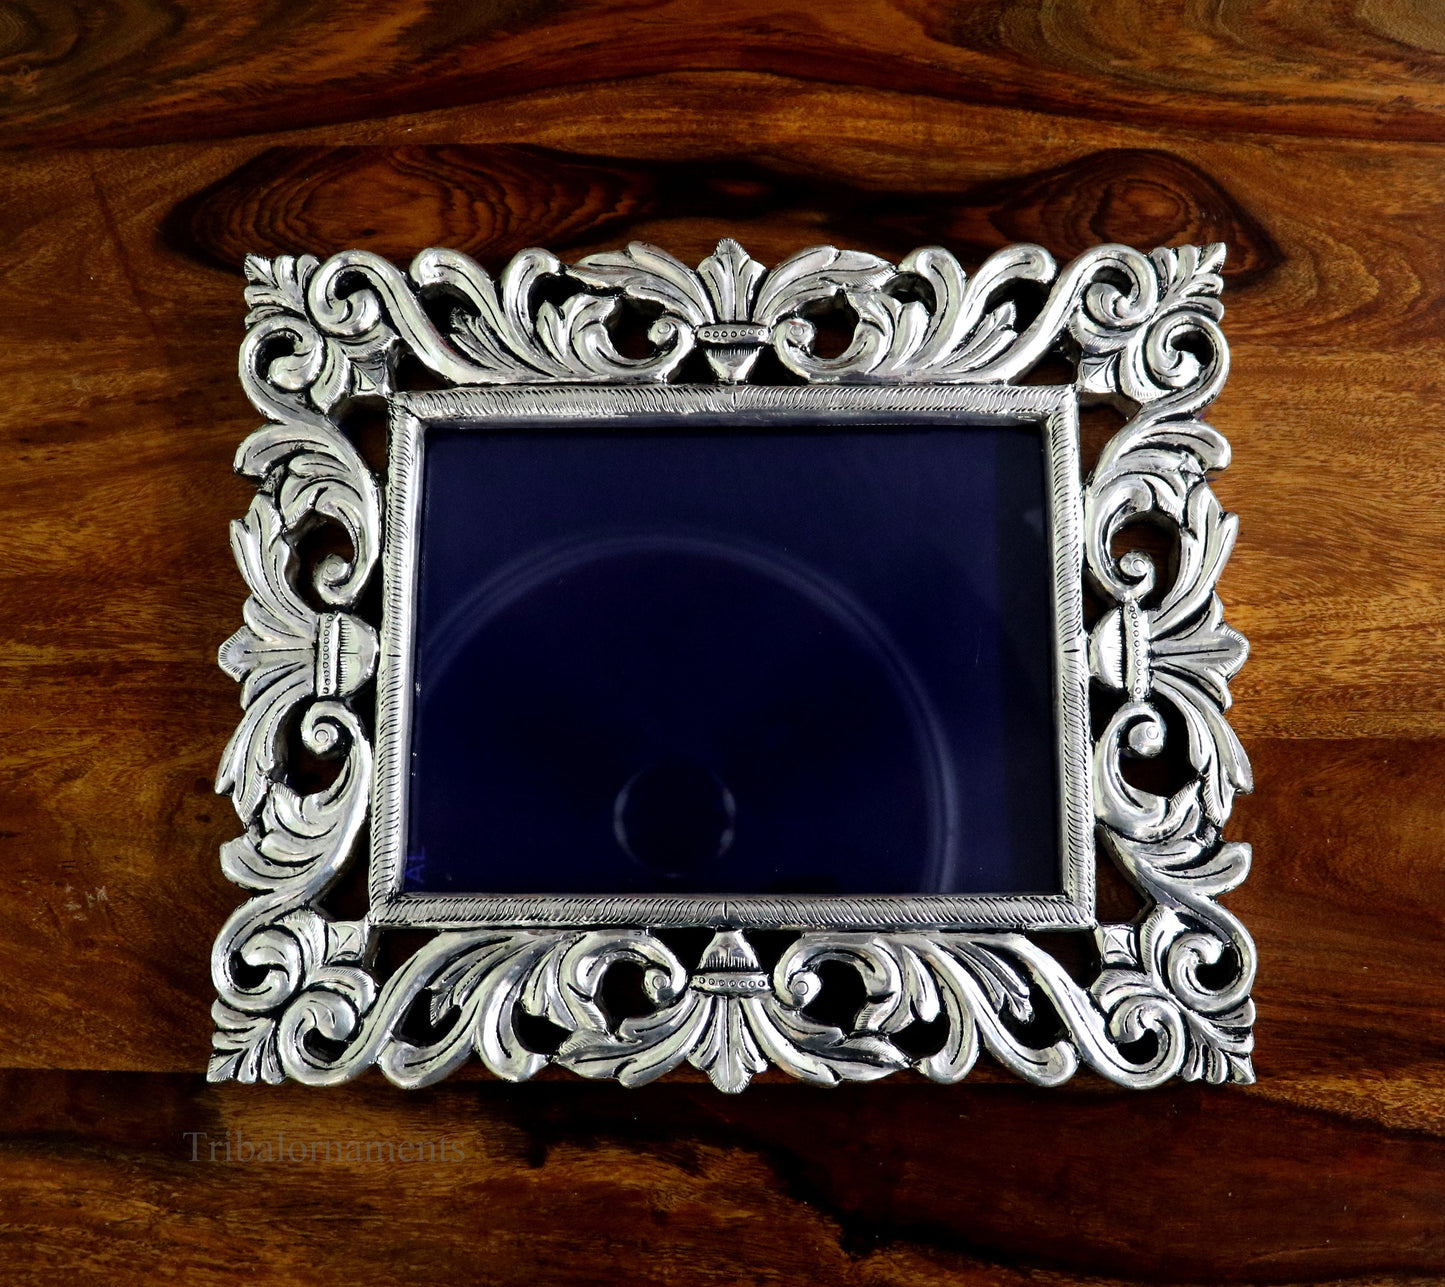 18"x 15" inches 999 fine silver handmade photo frame, amazing vintage royal style wooden base wall hanging frame, best corporate gift sf02 - TRIBAL ORNAMENTS